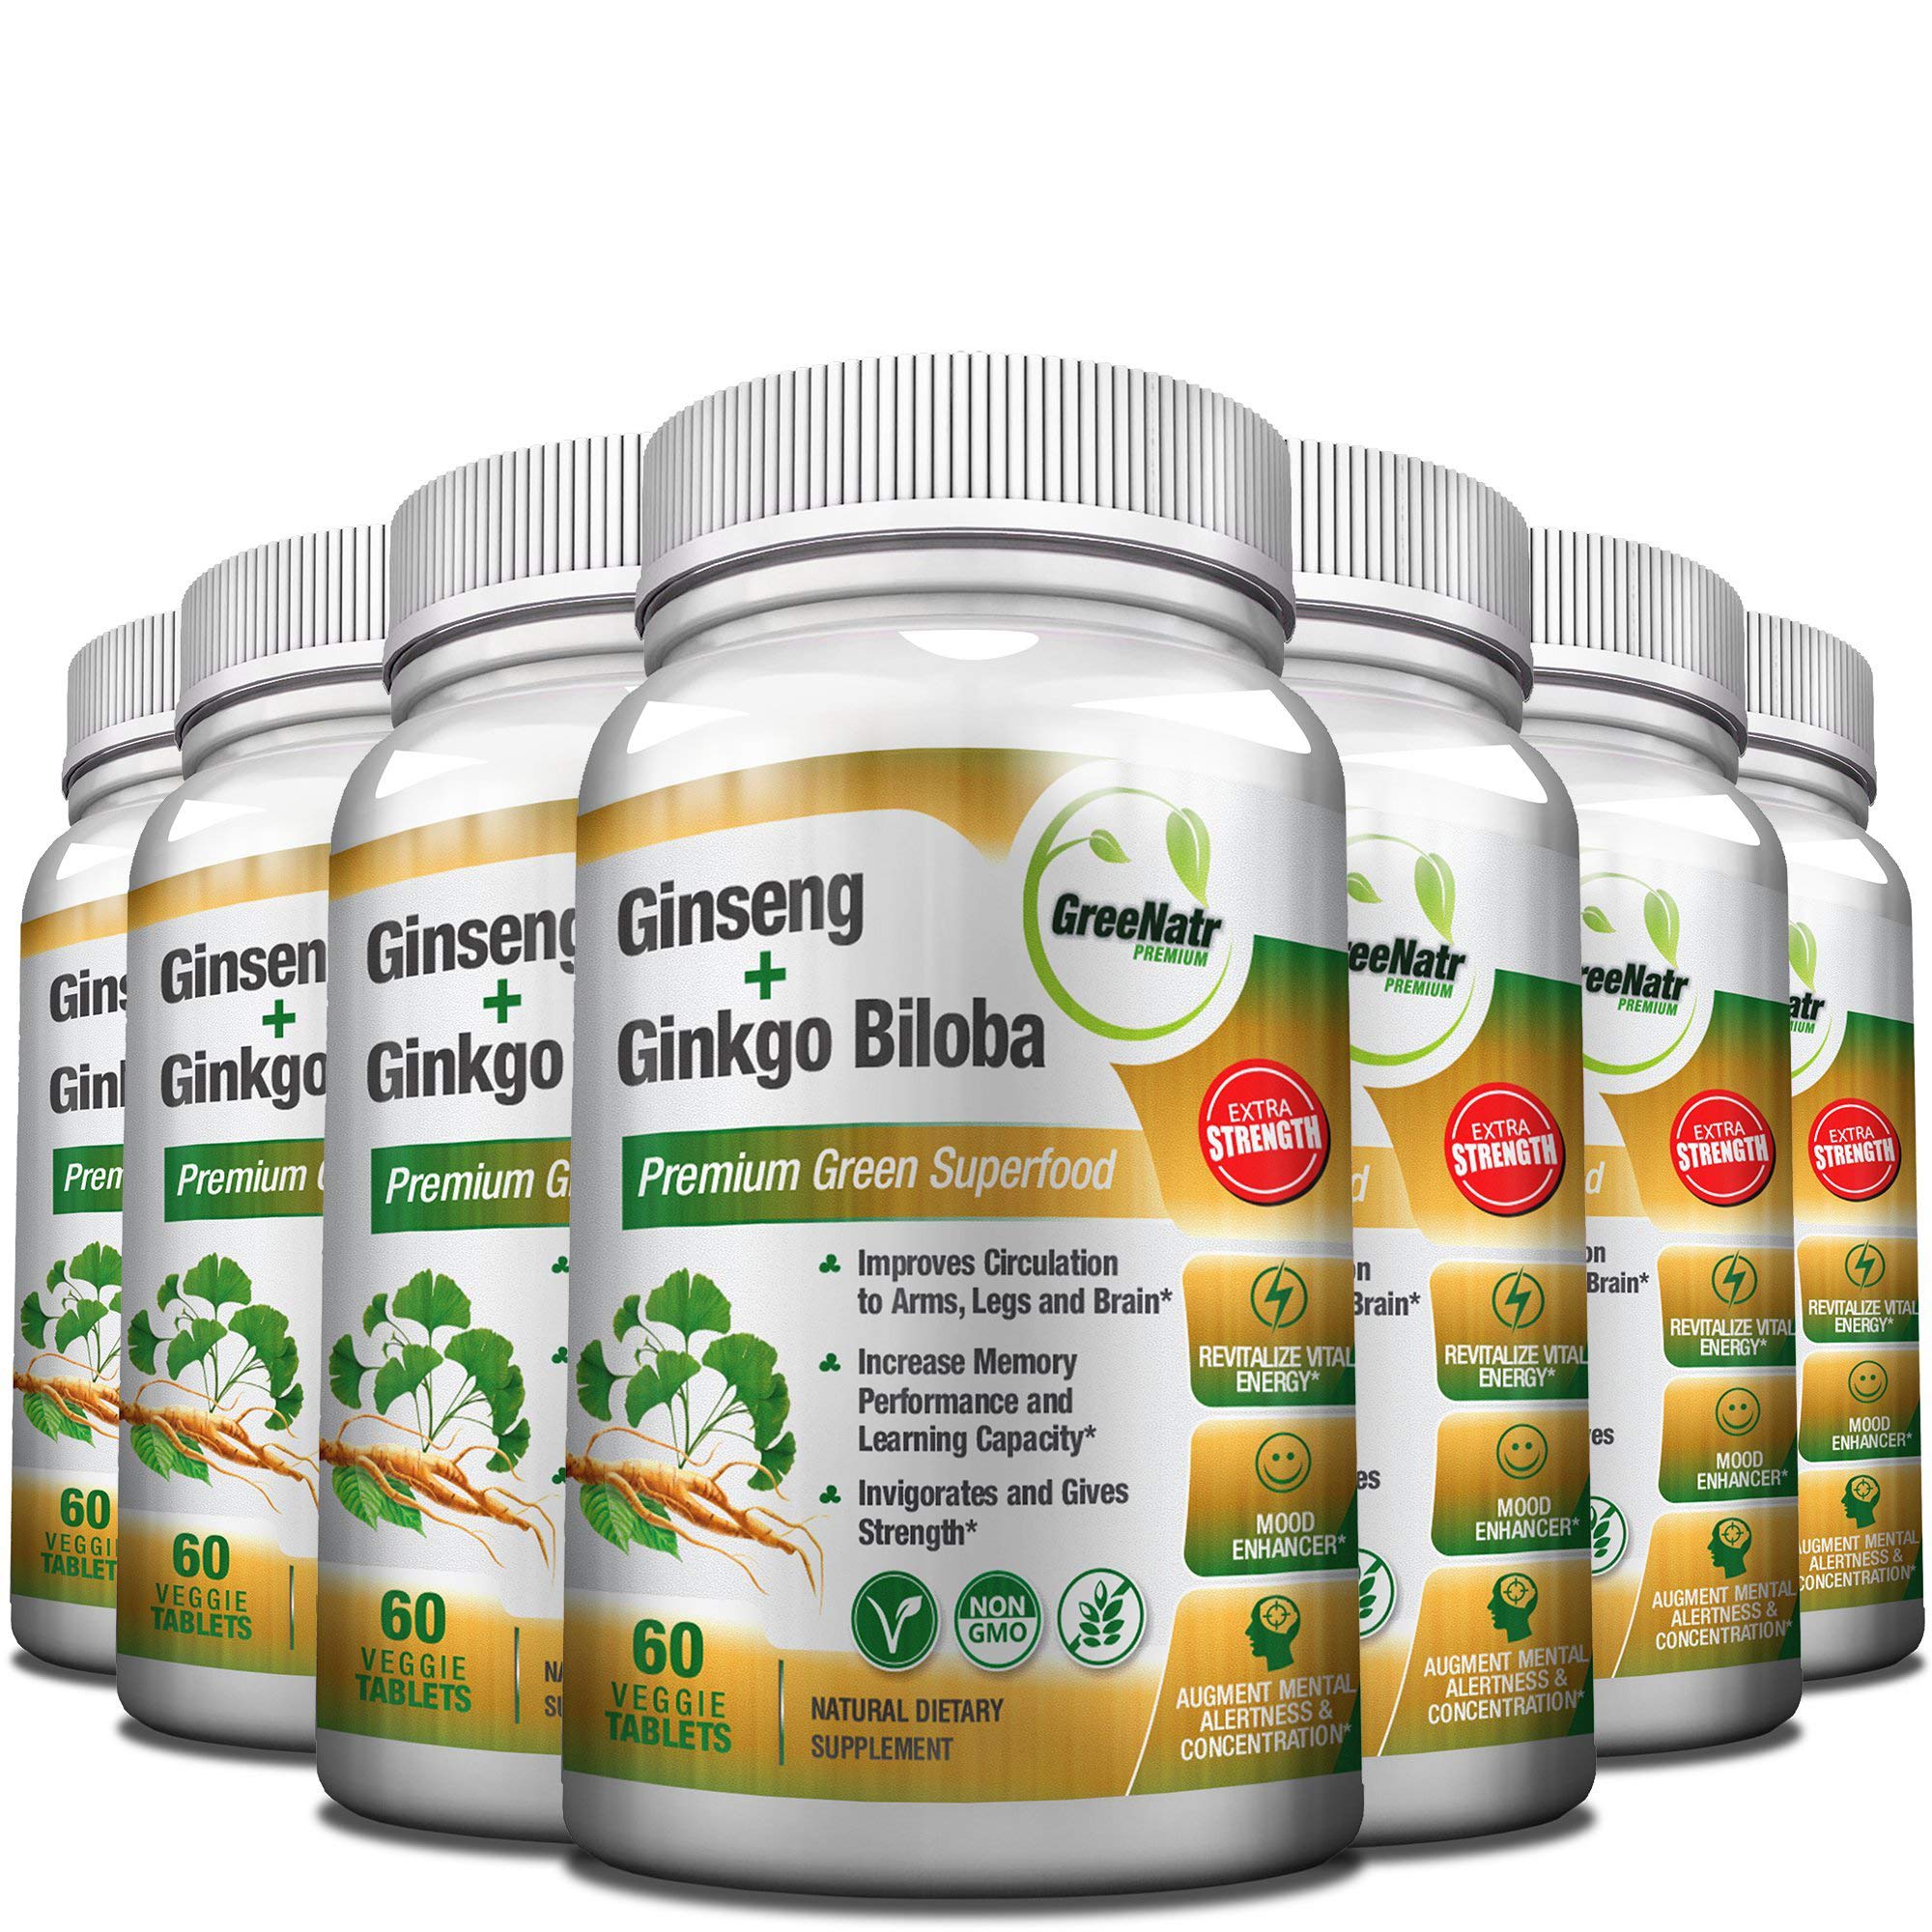 Panax Ginseng + Ginkgo Biloba Tablets – Premium Non-GMO/Veggie Superfood – Traditional Energy Booster and Brain Sharpener – Unique Twin Supplement ...